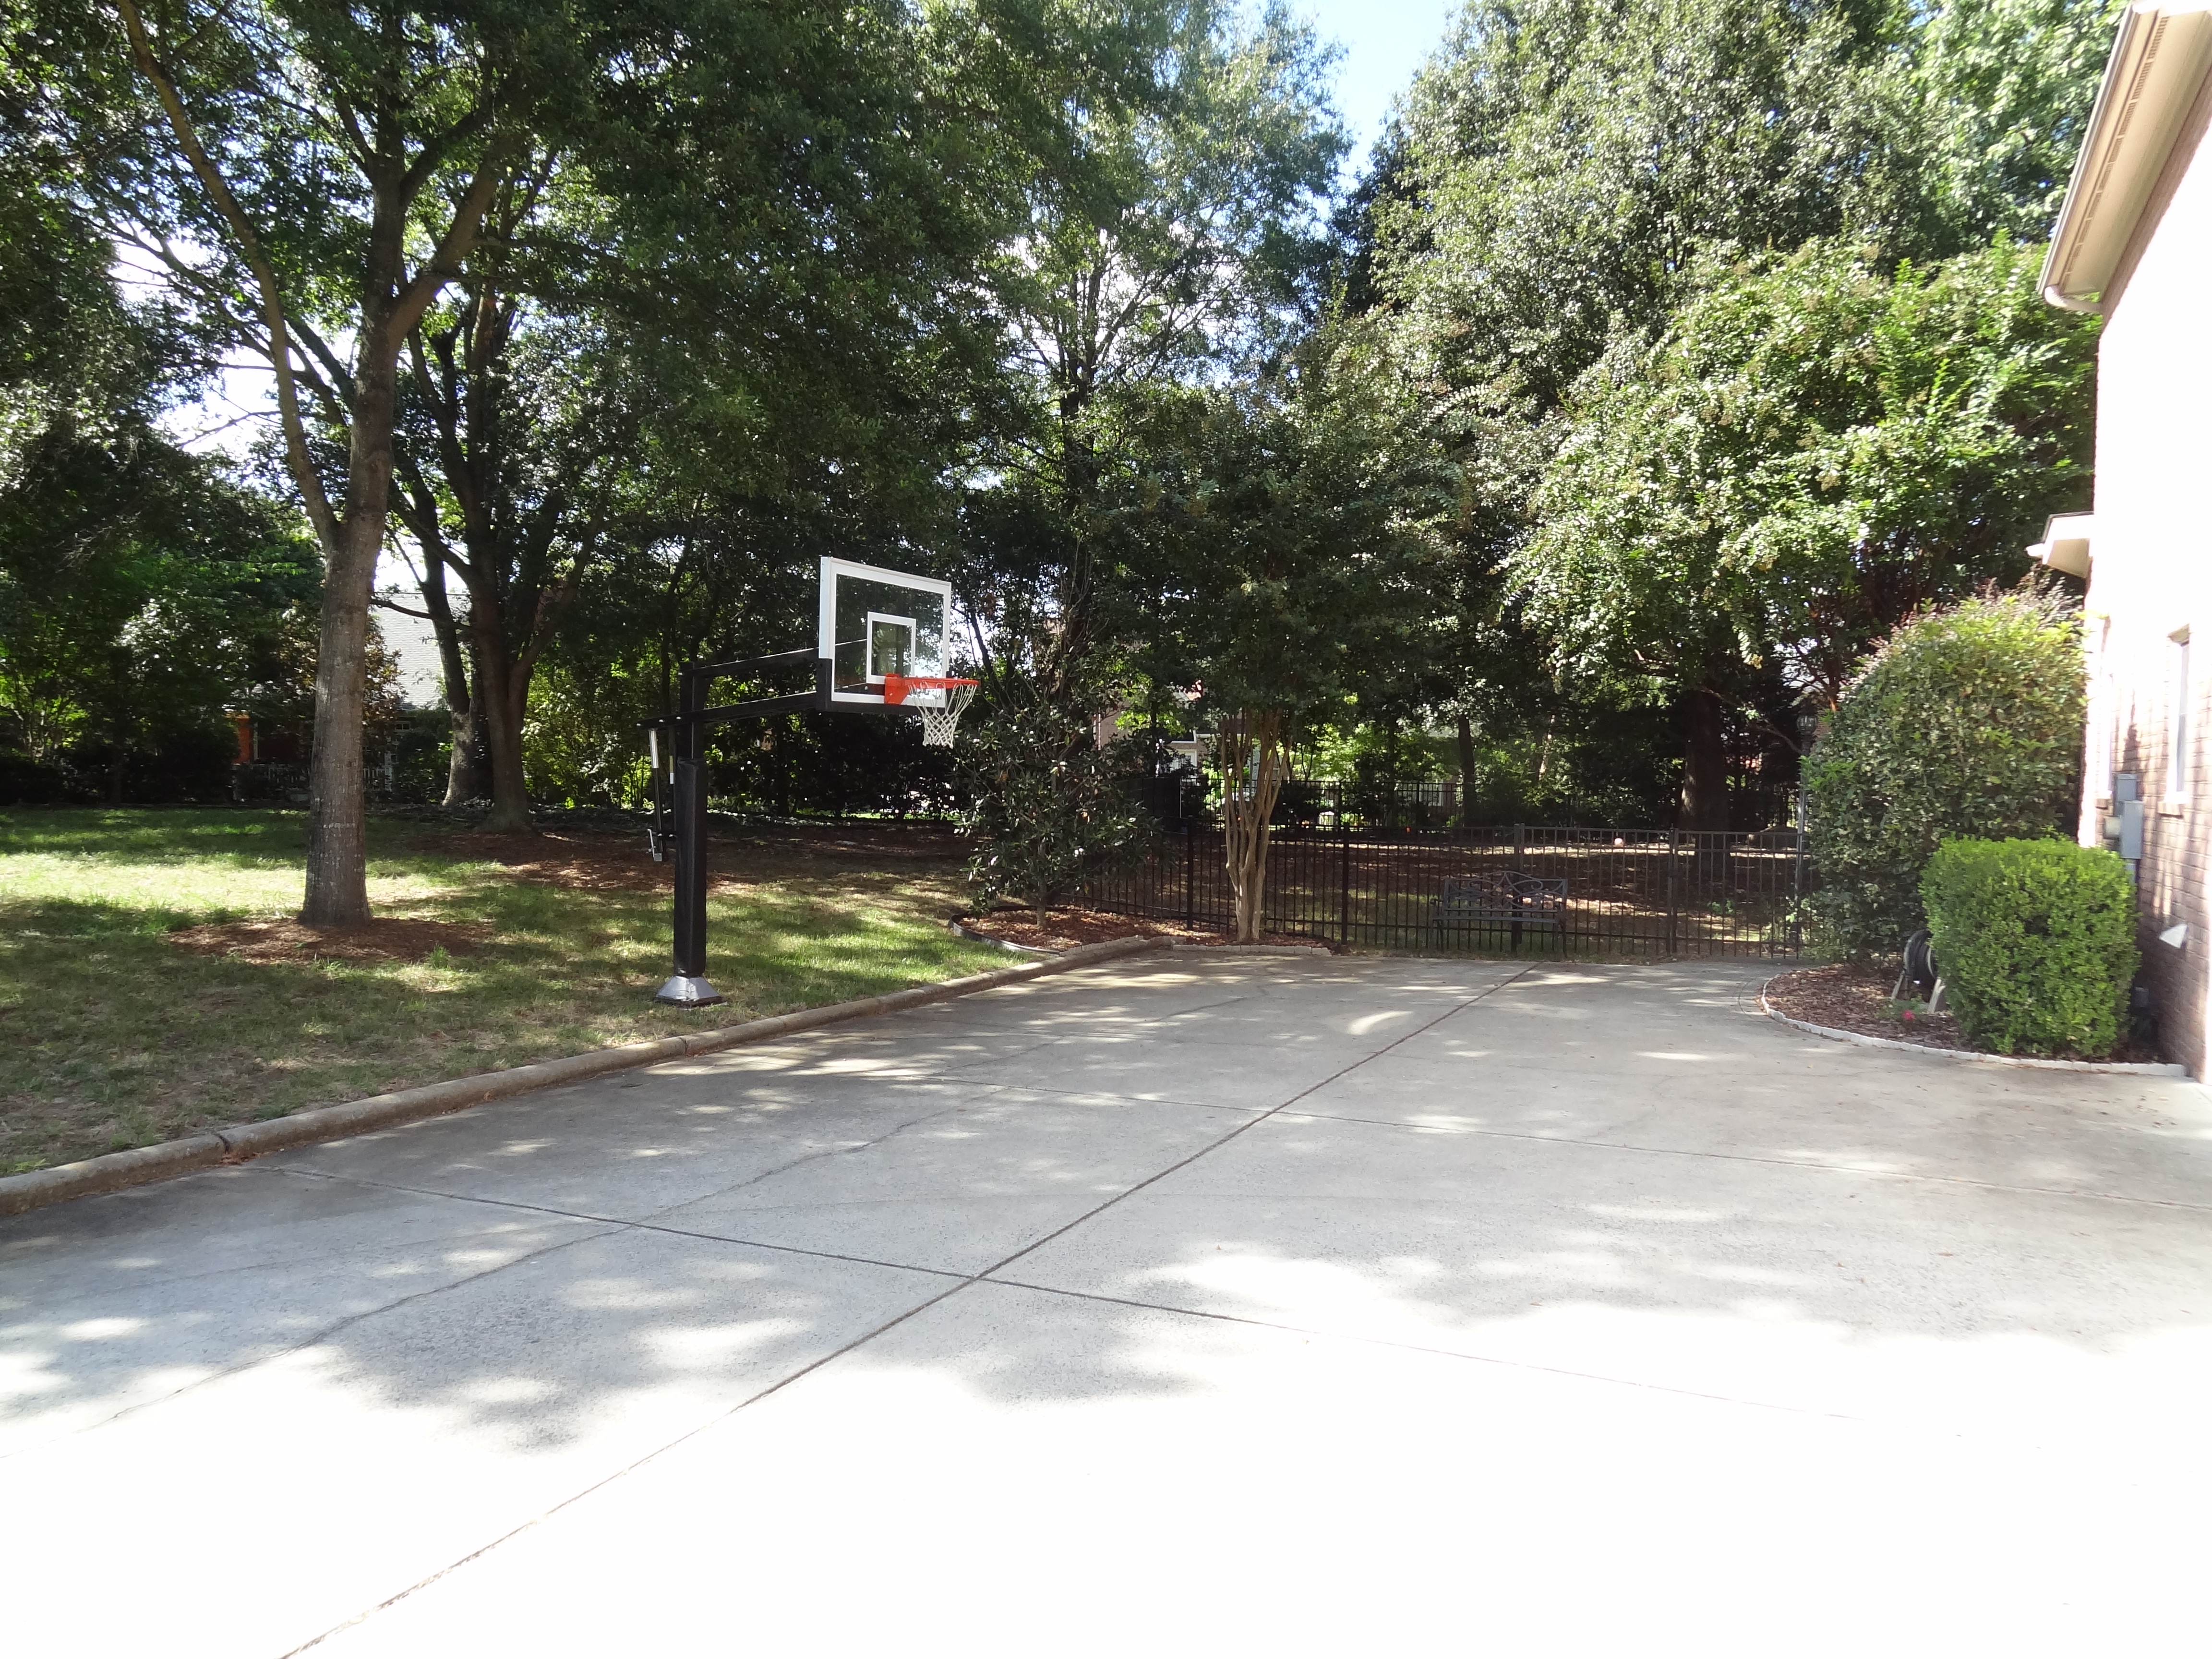 This long view wide shot shows a Pro Dunk Gold Basketball installed neatly next to the driveway of this North Carolina home.